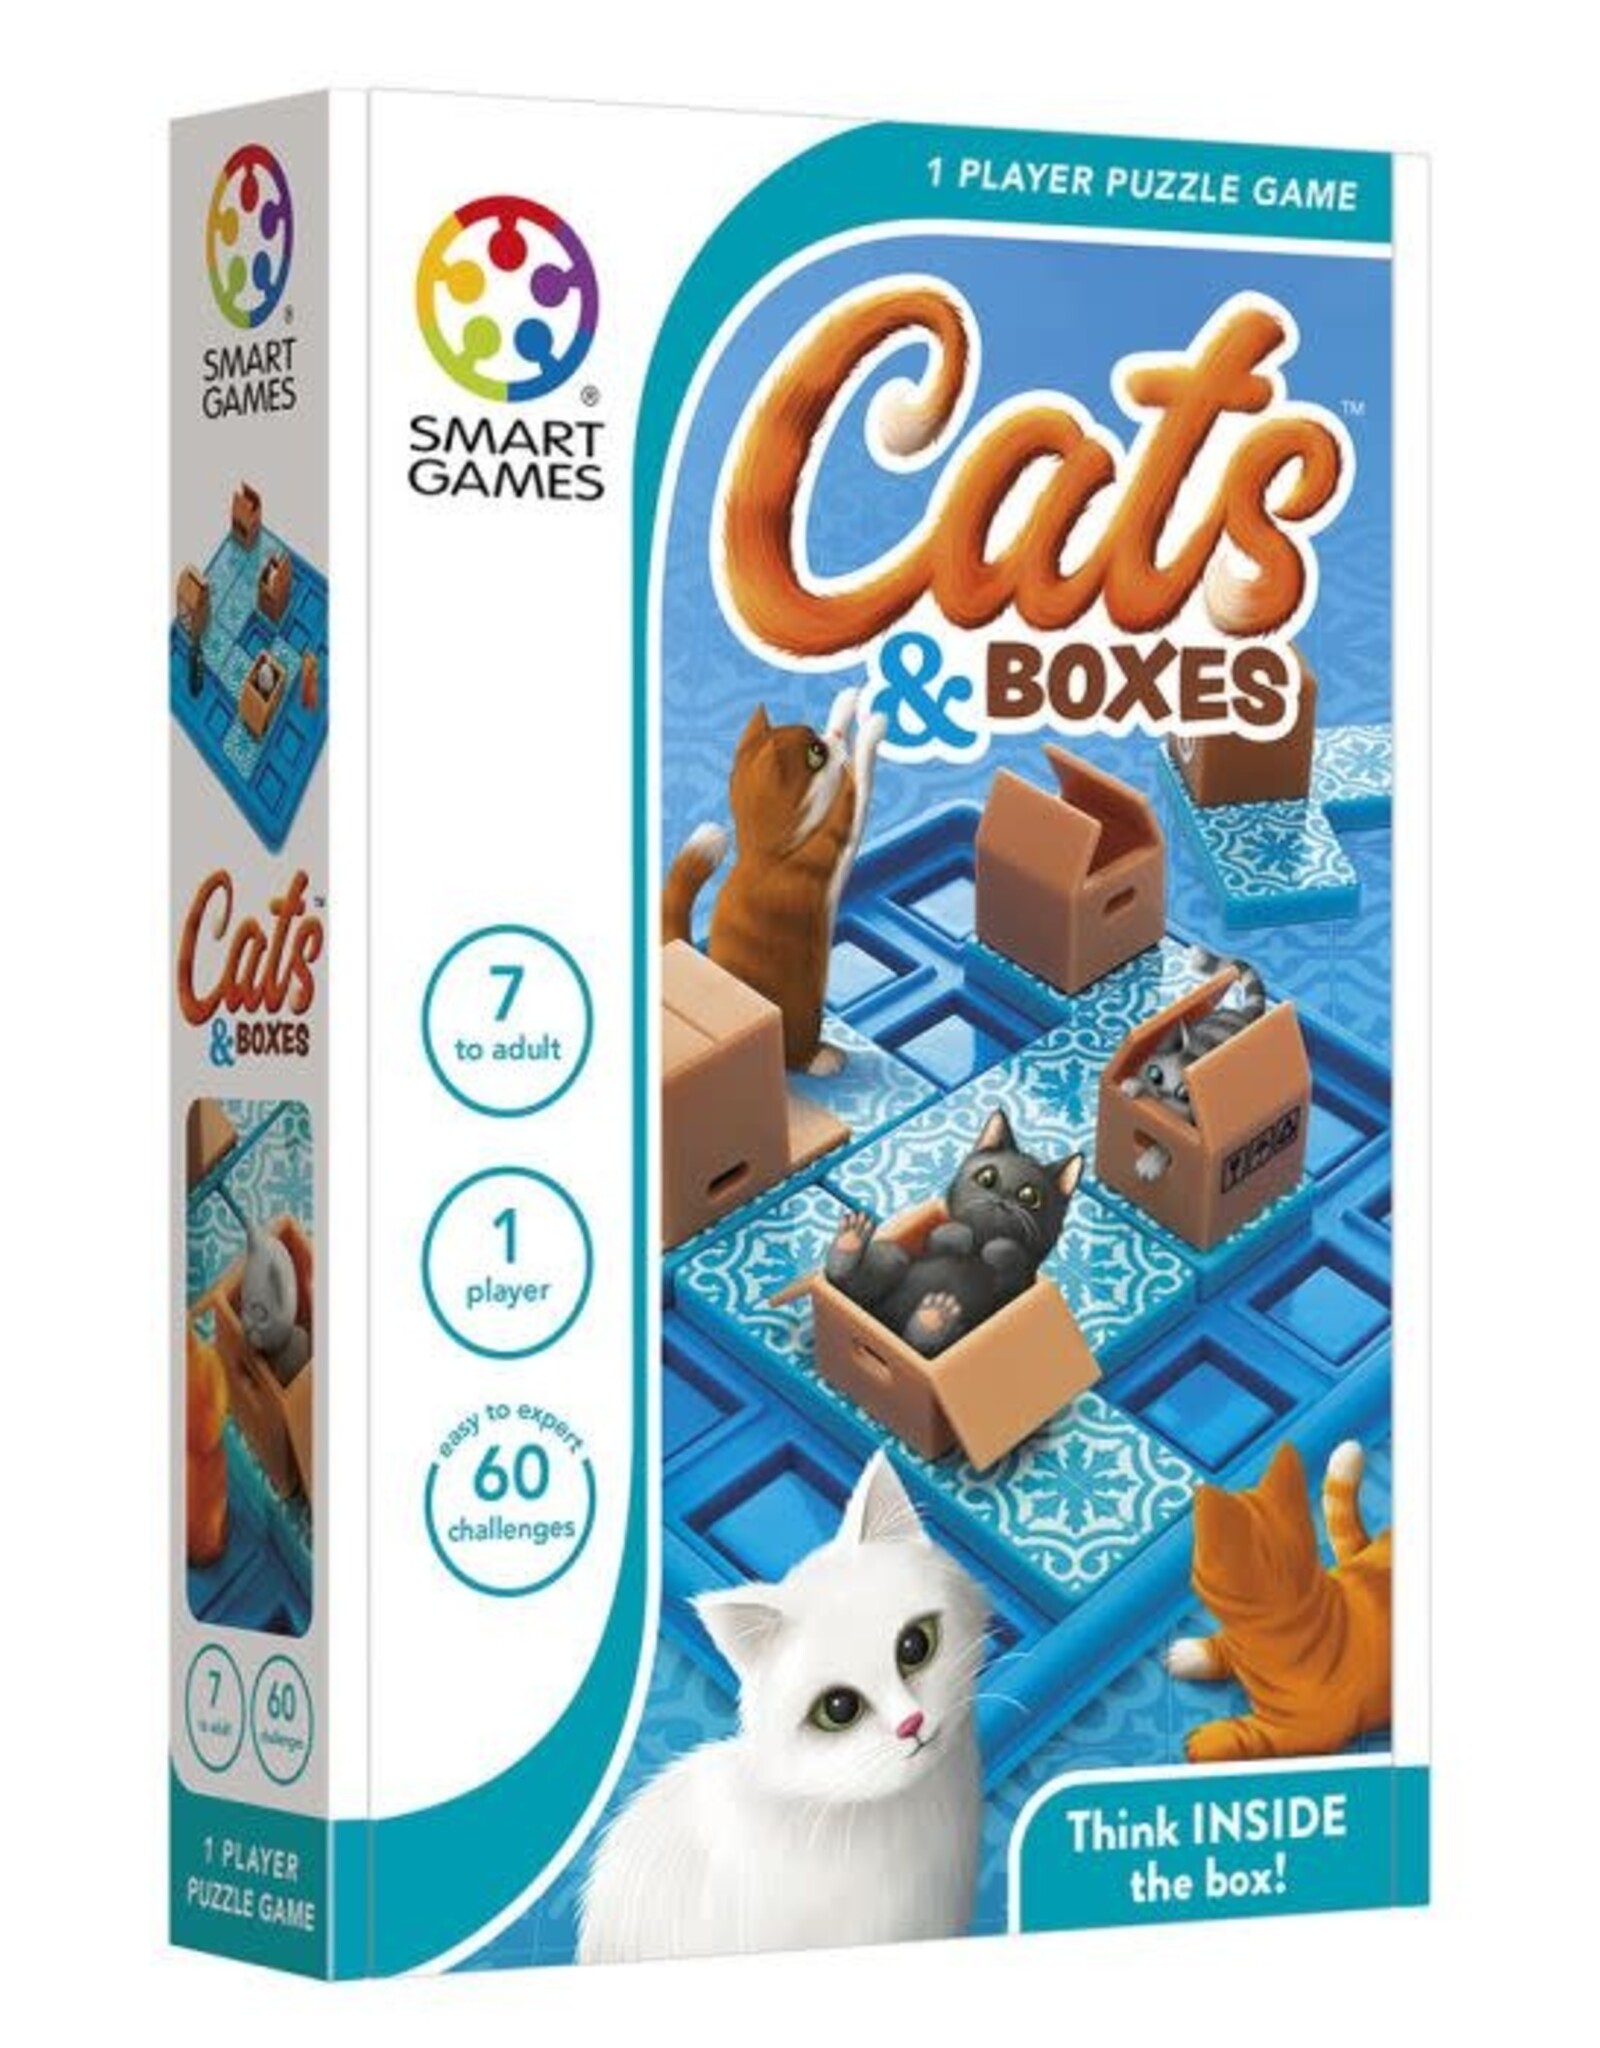 Smart Toys & Games Cats & Boxes